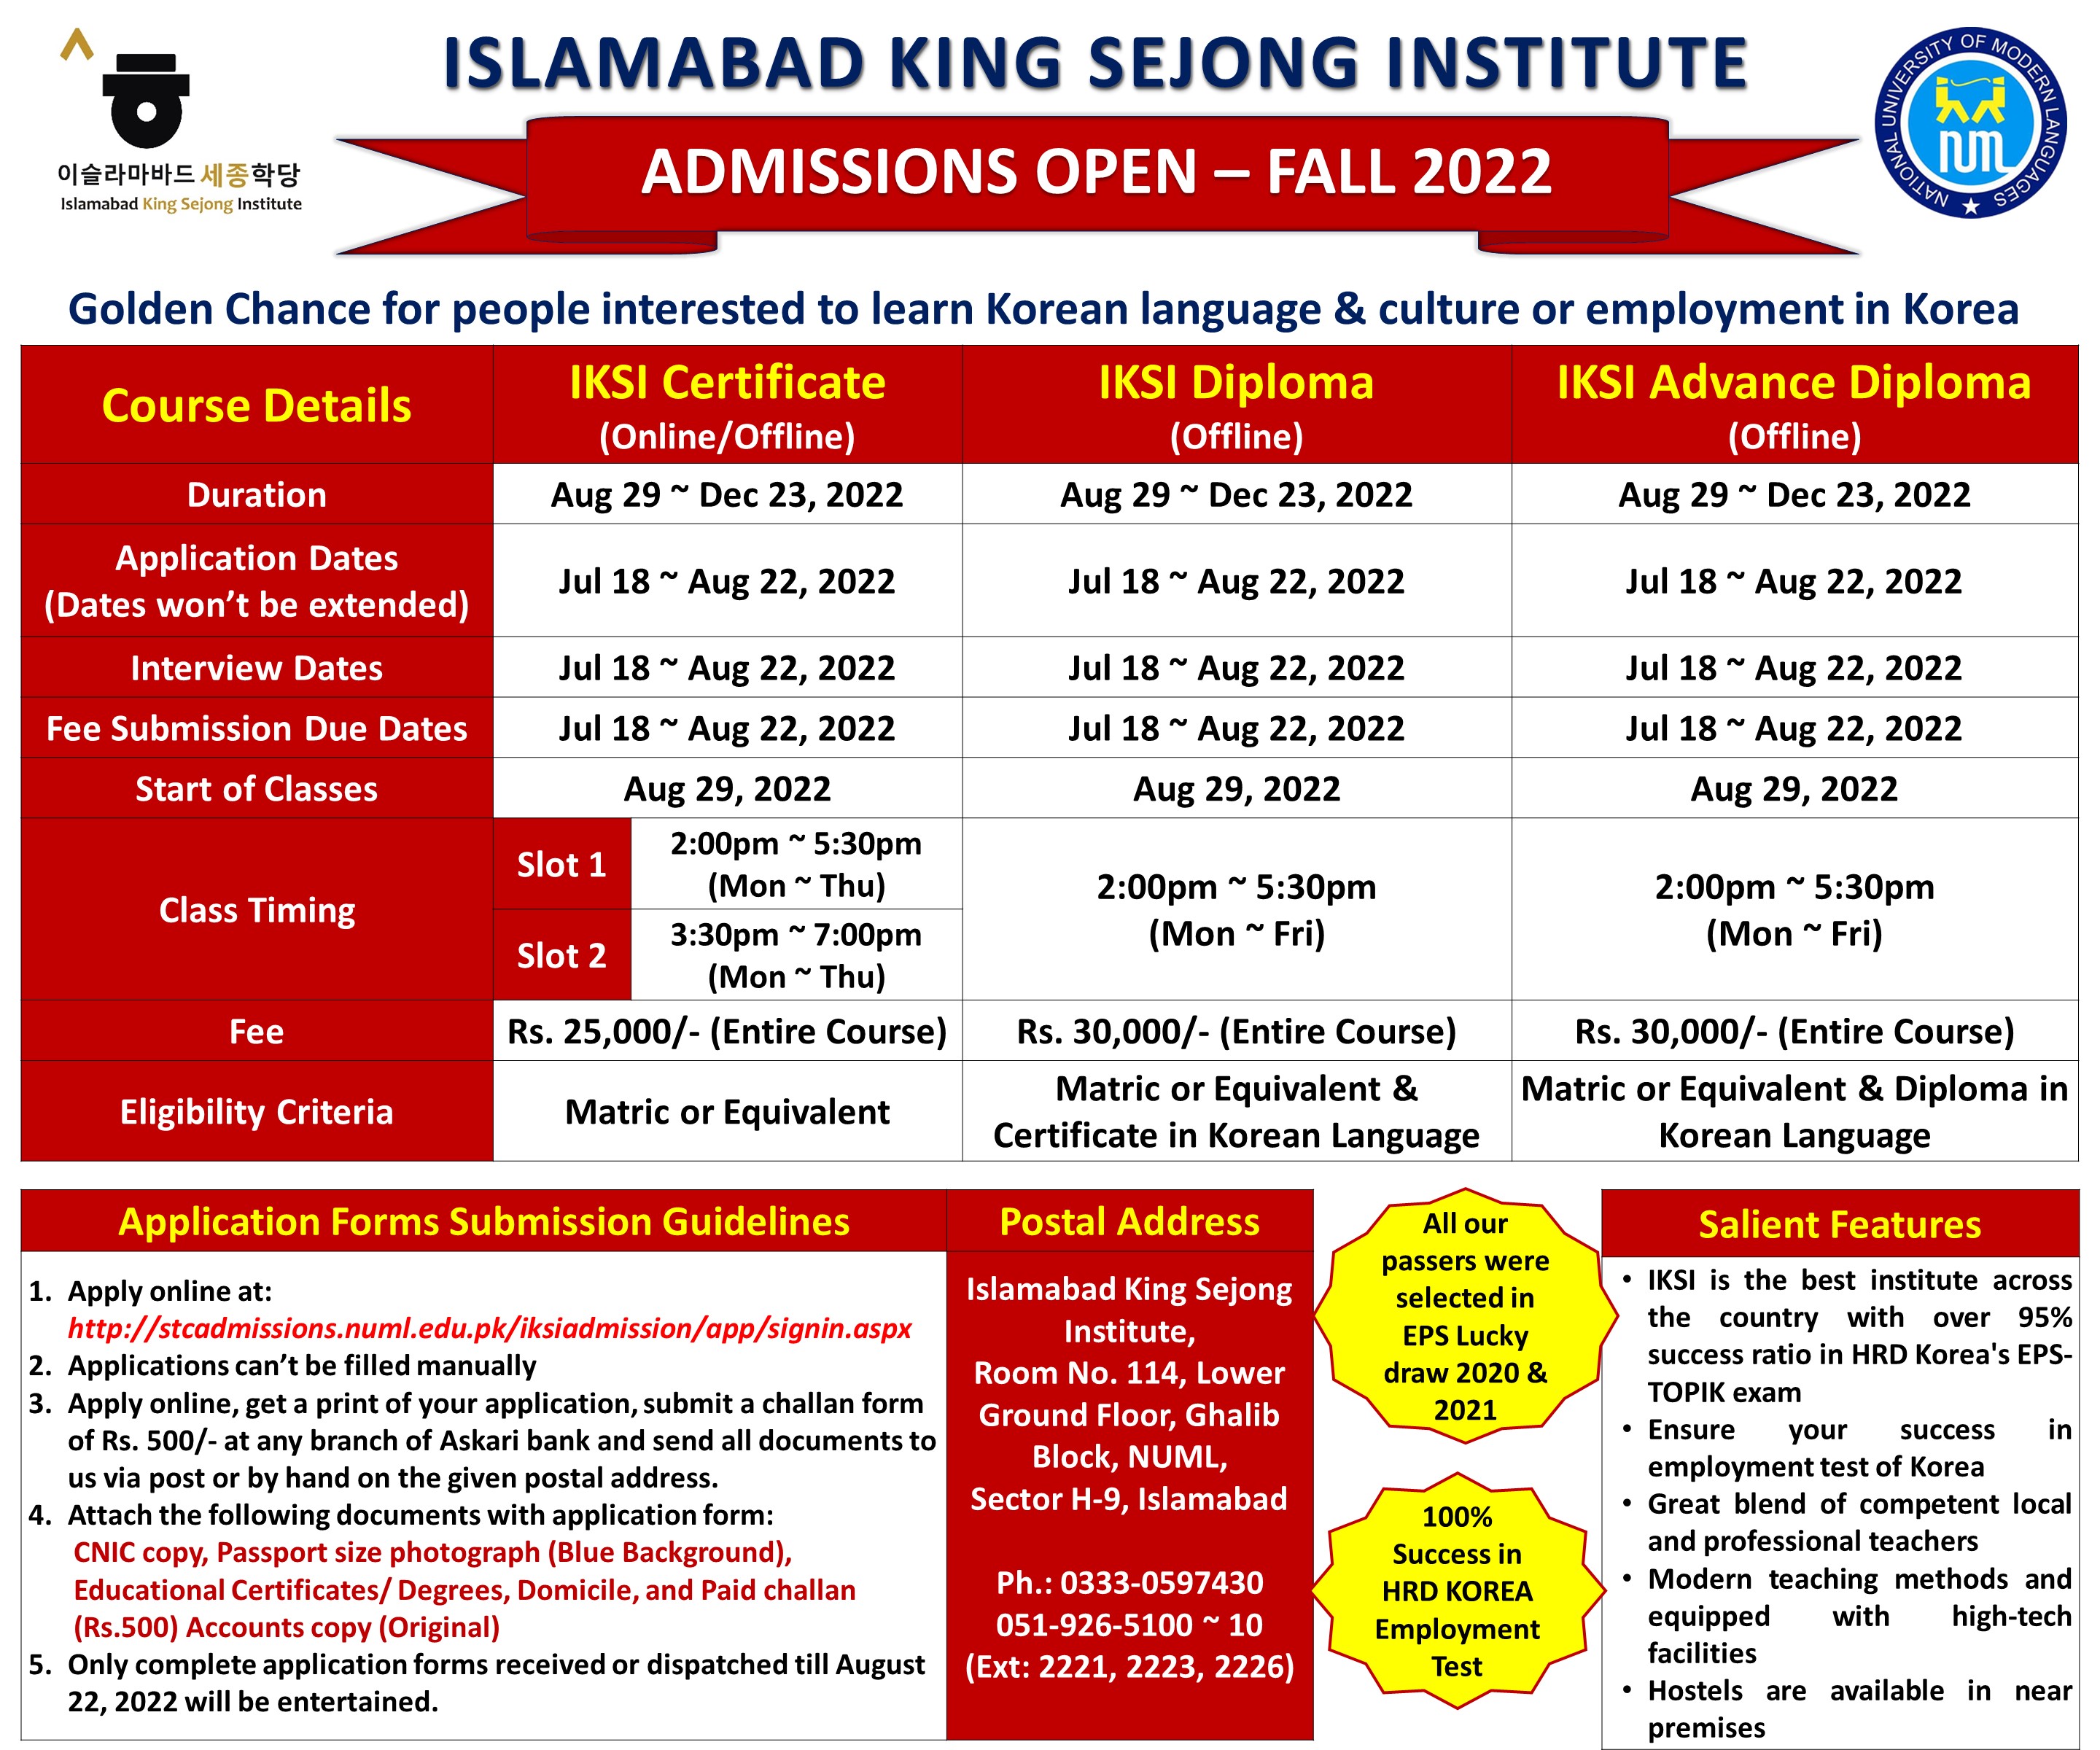 ISLAMABAD KING SEJONG INSTITUTE - ADMISSIONS OPEN FALL 2022